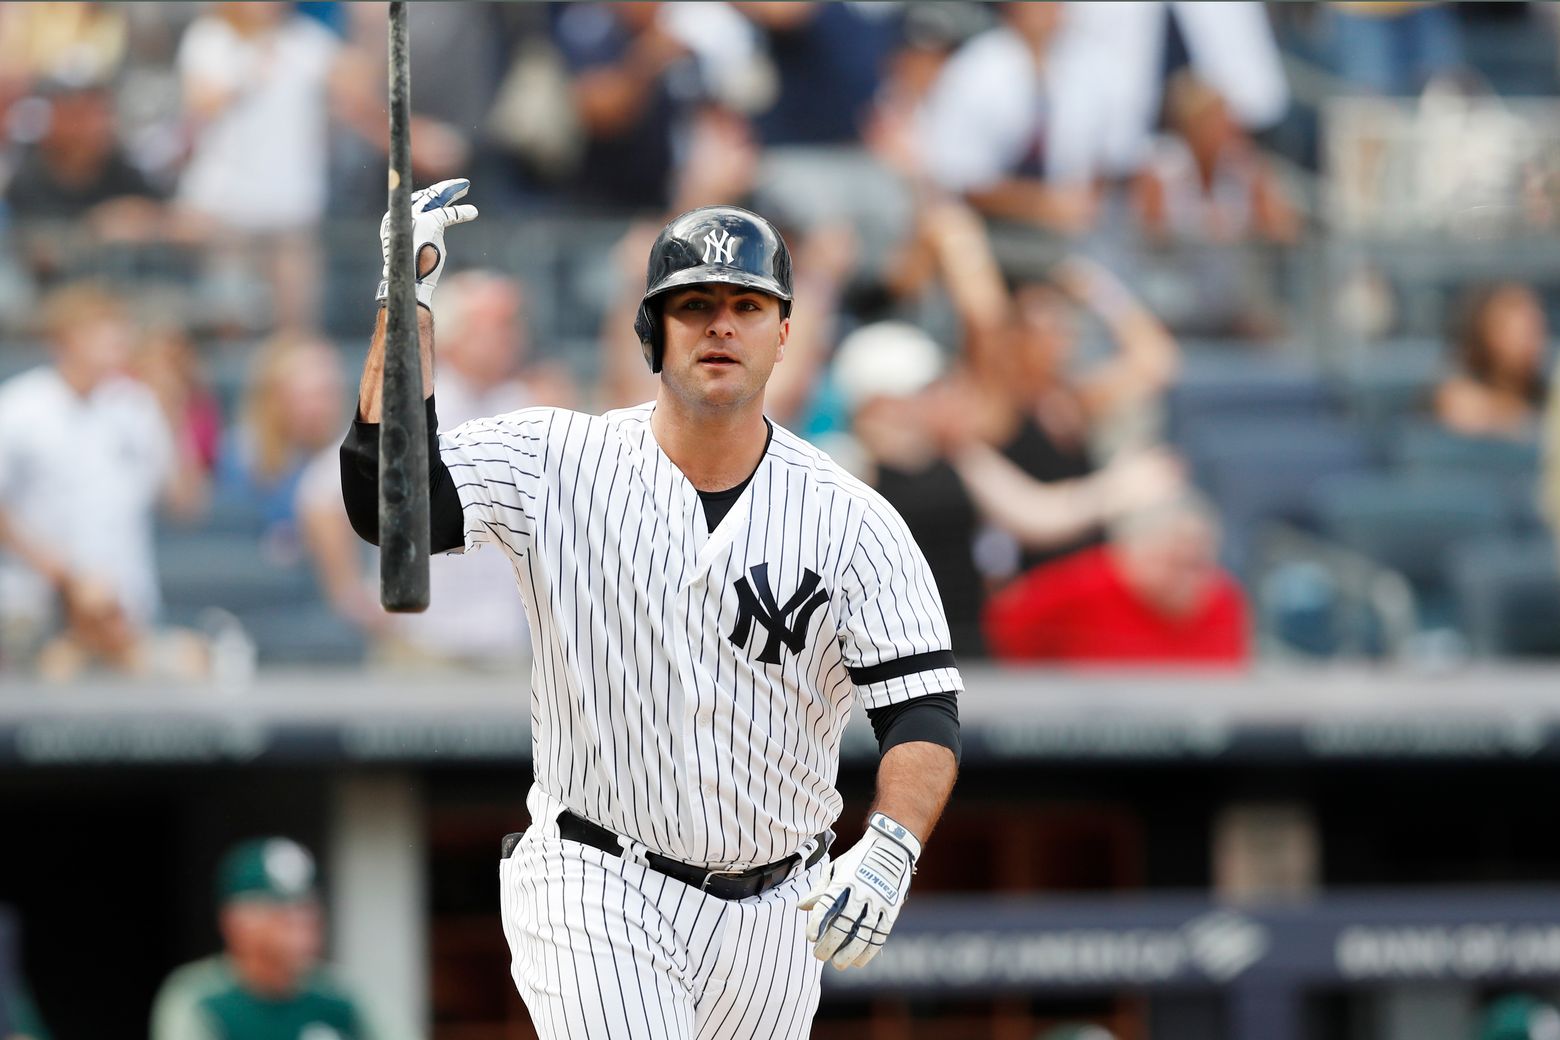 Lifelong Yankee fan Mike Ford walks off NY to sink A's, 5-4